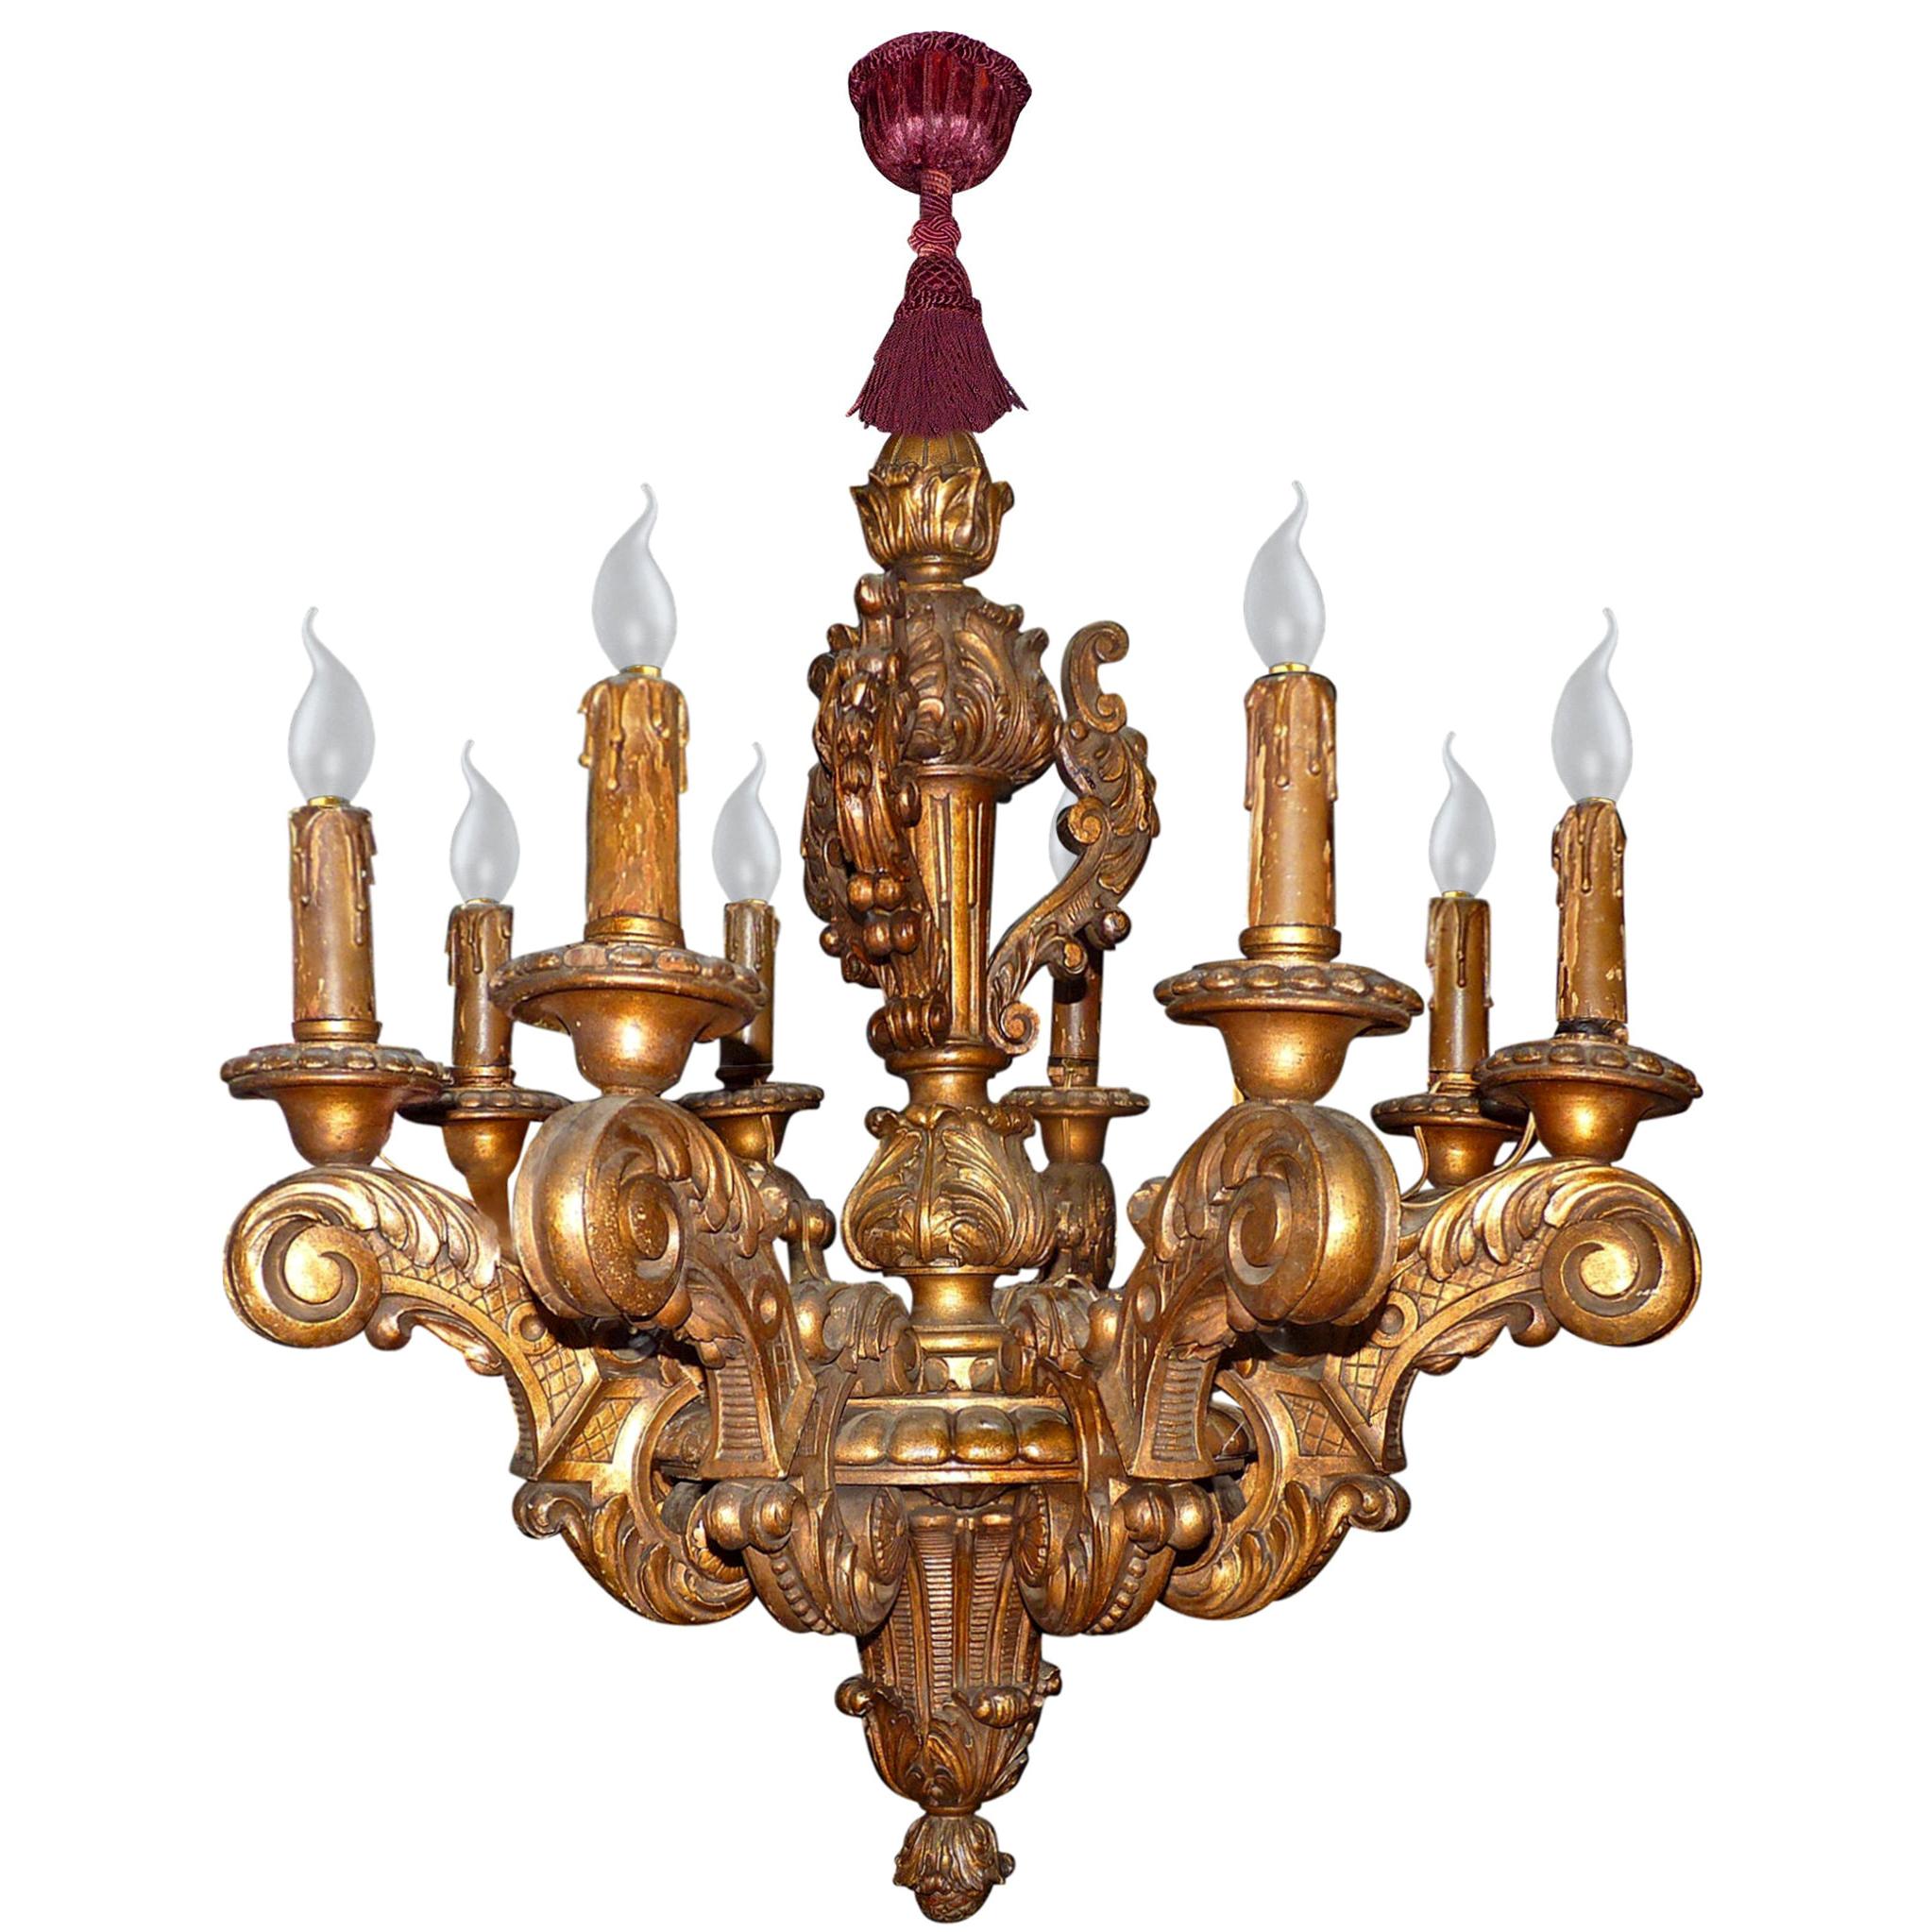 Massive French Louis XV Baroque Gilt Carved Wood 8-Light Chandelier 19th Century For Sale